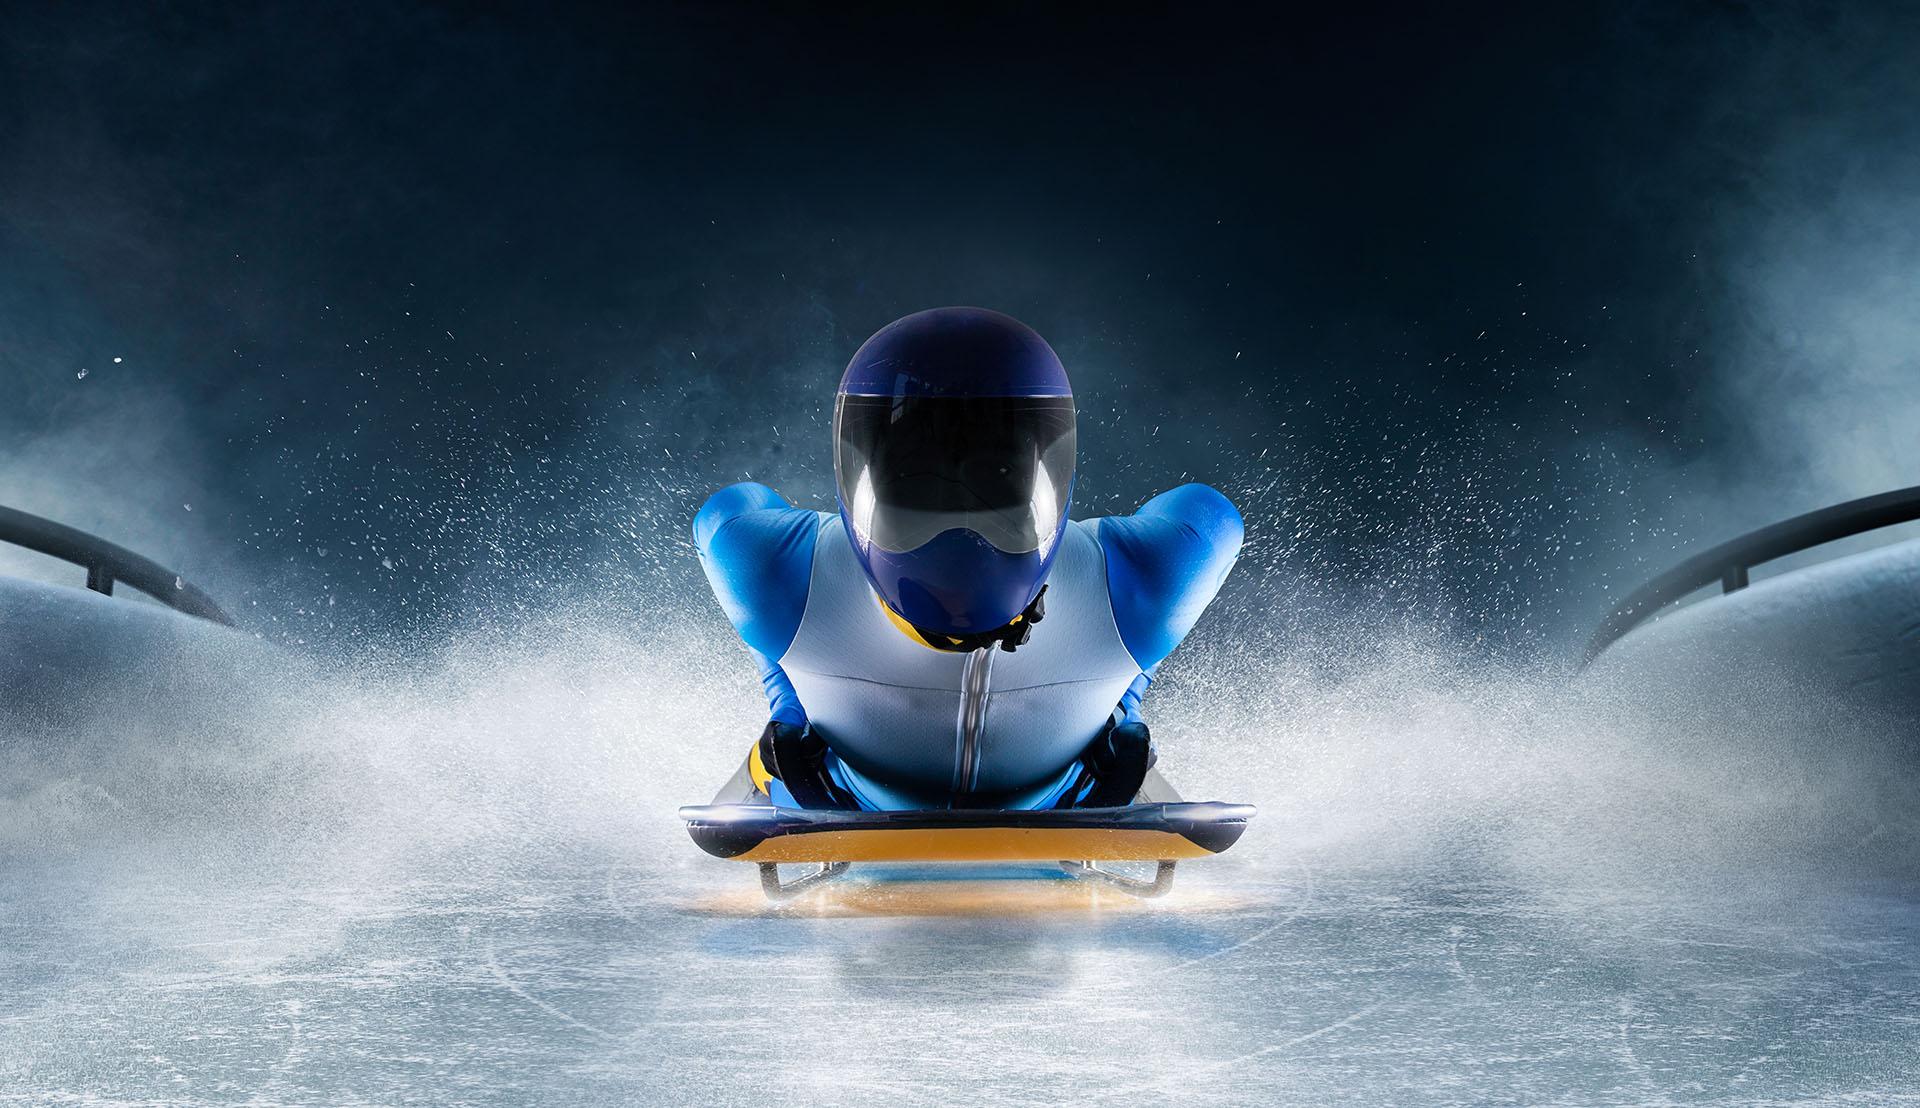 2022 promises to be a big year for 4K and live sports. 021824d3 winter olympic image